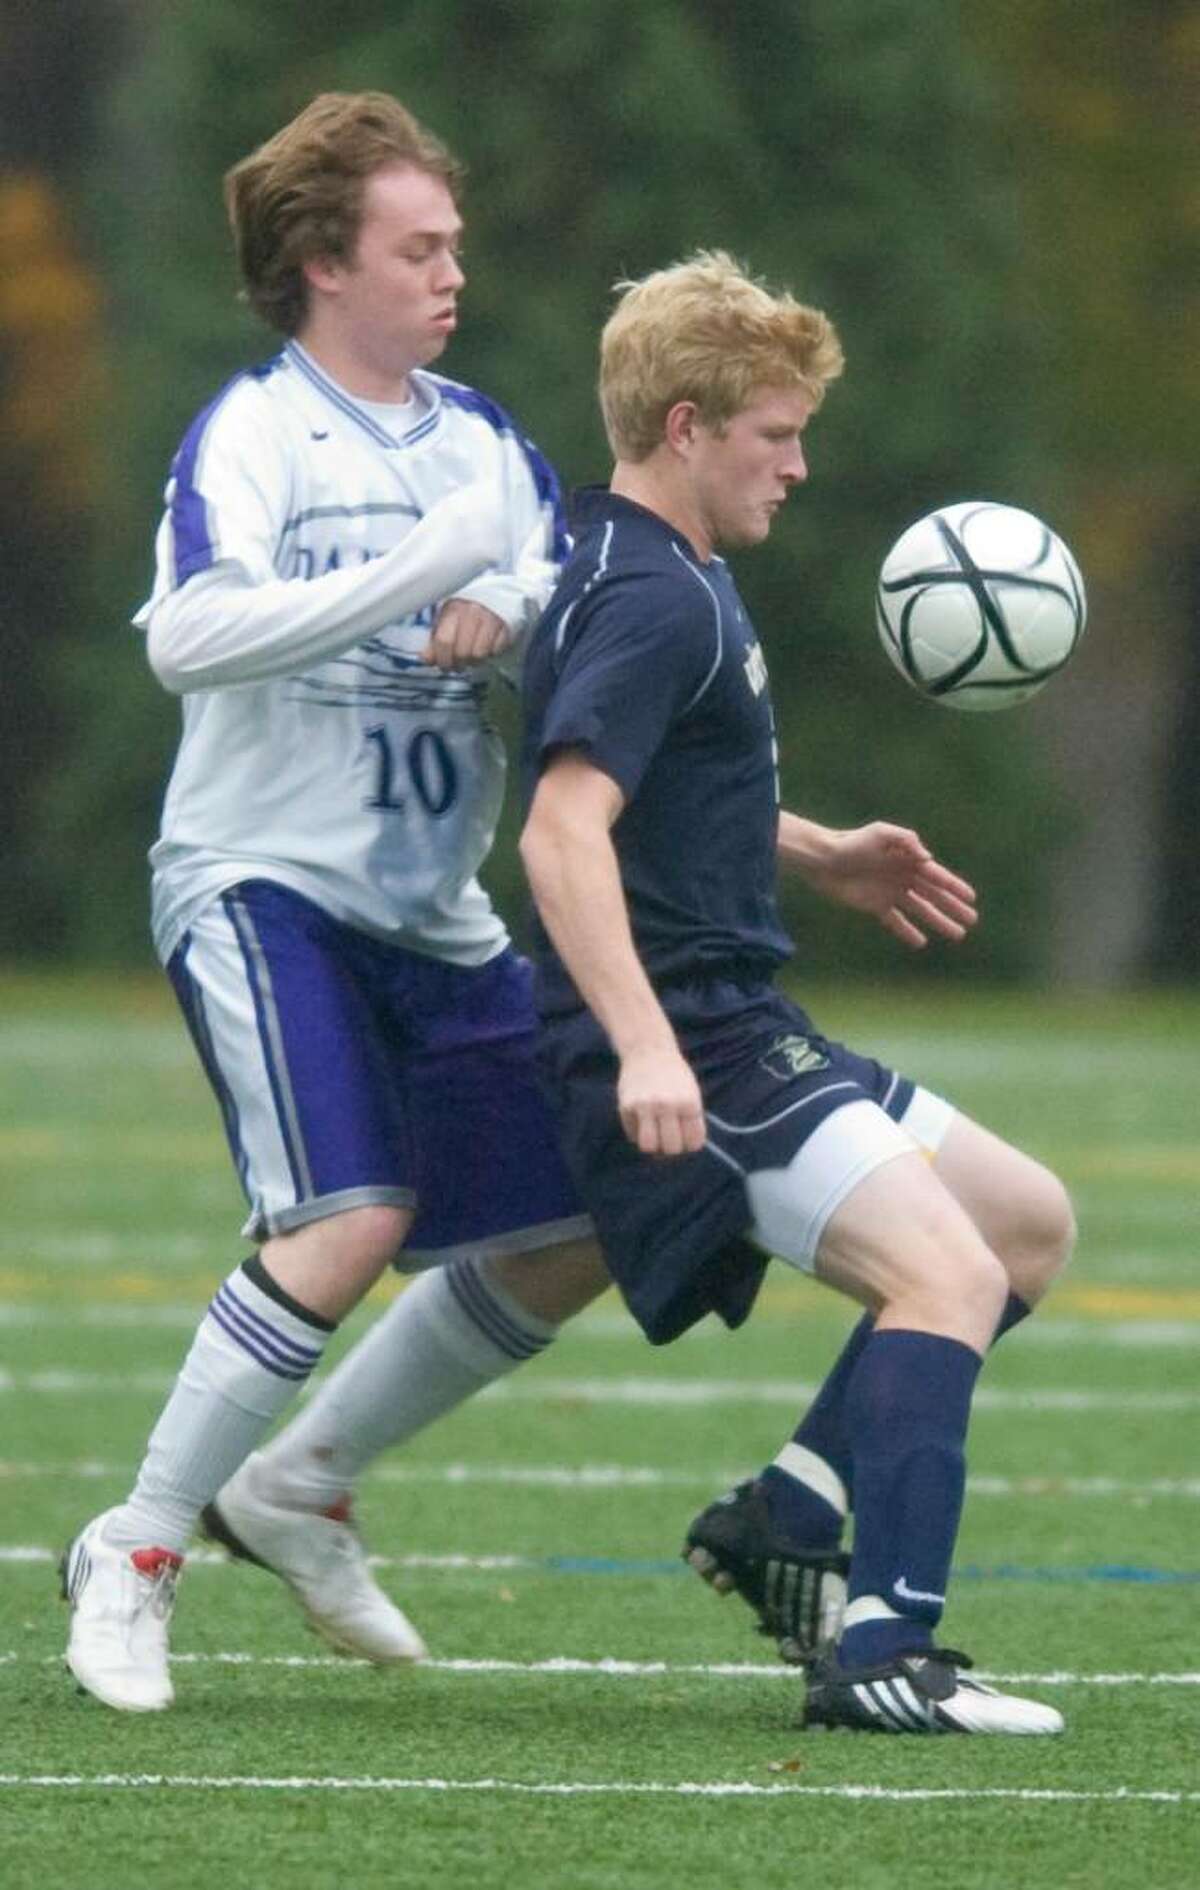 Master's G. Meads, left, and King's Matt Johnson, right, during an FAA soccer game at King in Stamford, Conn. on Tuesday, Oct. 27, 2009.